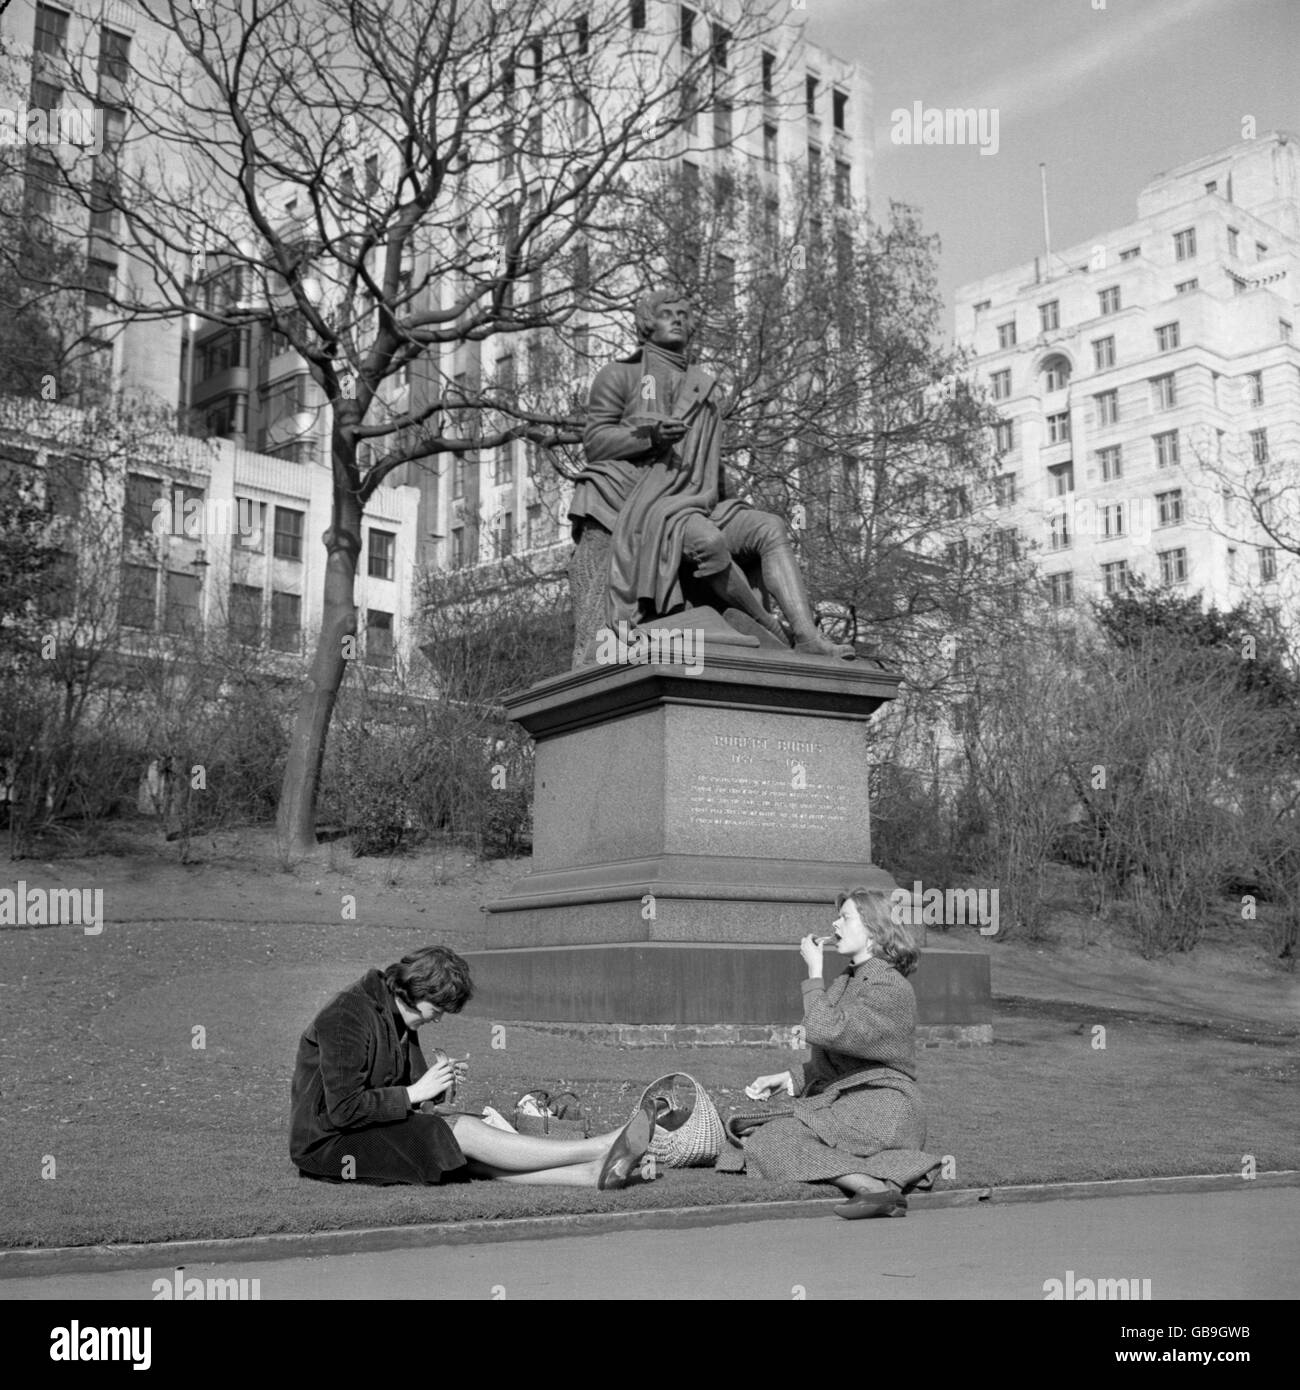 Memories of the big freeze melt away in the milder air of Spring as these girls enjoy a lunch-time picnic by the statue of Robert Burns in the gardens on Victoria Embankment, London. Stock Photo